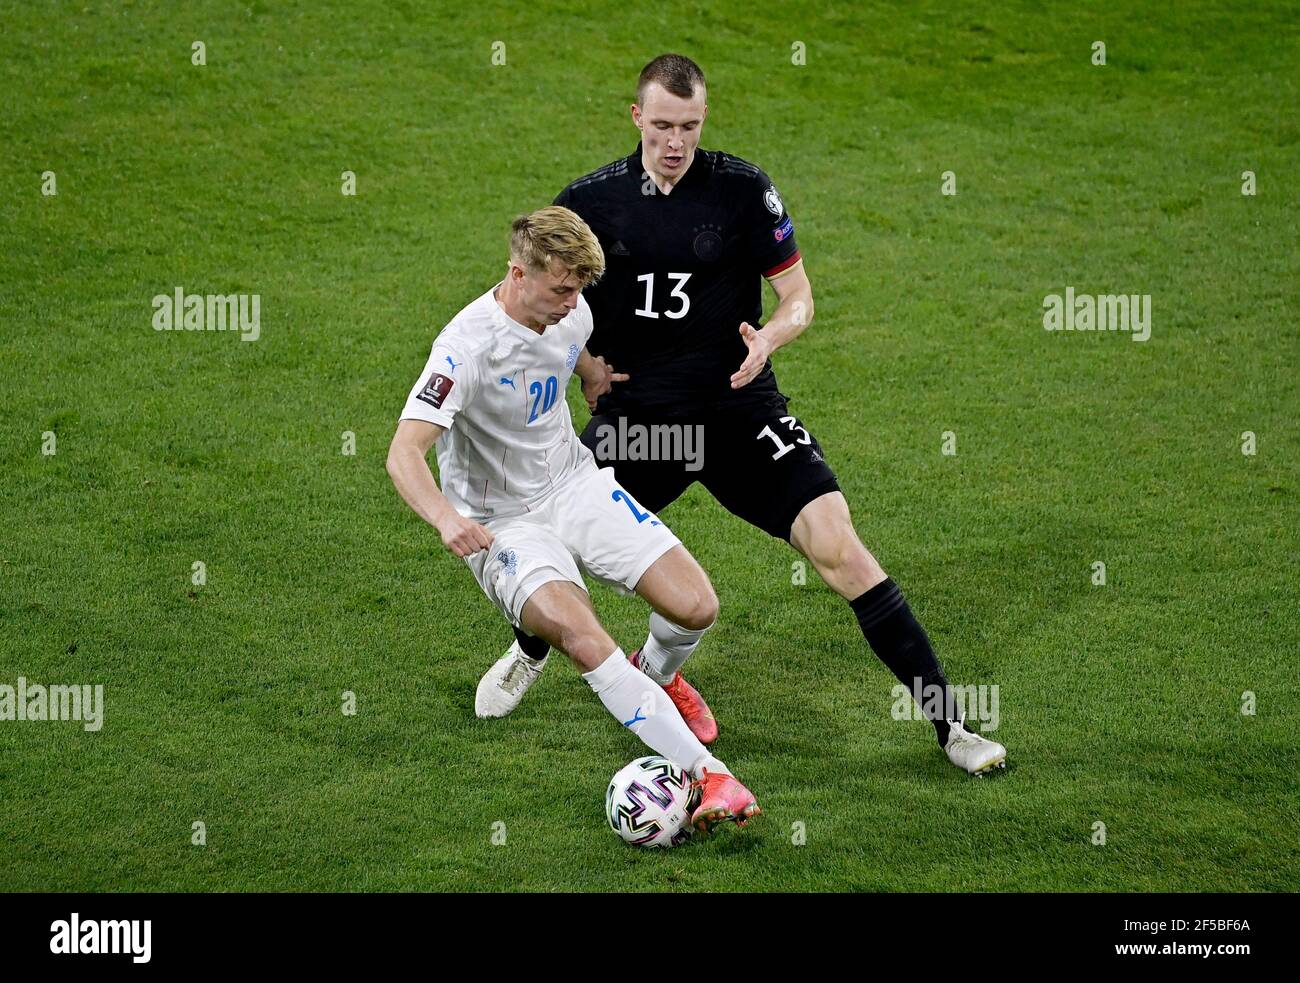 Soccer Football - World Cup Qualifiers Europe - Group J - Germany v Iceland - MSV-Arena, Duisburg, Germany - March 25, 2021 Iceland's Albert Gudmundsson in action with Germany's Lukas Klostermann REUTERS/Tobias Schwarz Stock Photo